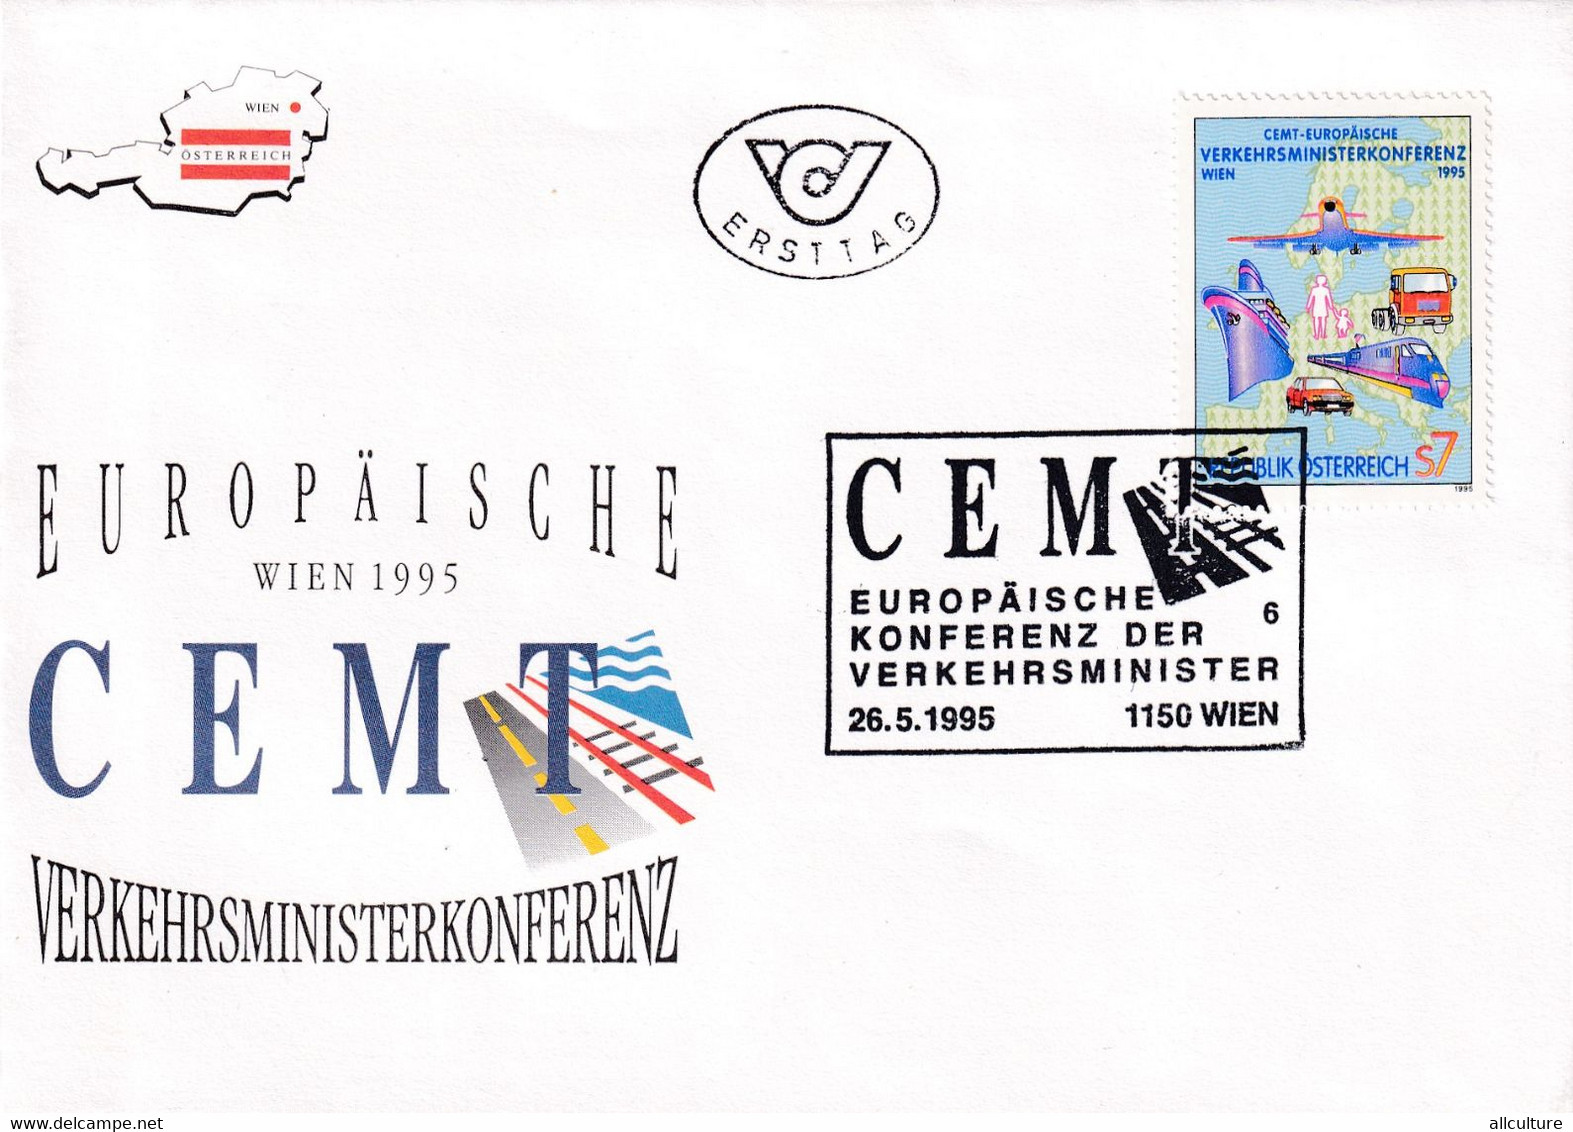 A8203- EUROPEAN CONFERENCE OF THE MINISTERS FOR TRANSPORT 1995  REPUBLIC OESTERREICH USED STAMP ON COVER AUSTRIA - Storia Postale